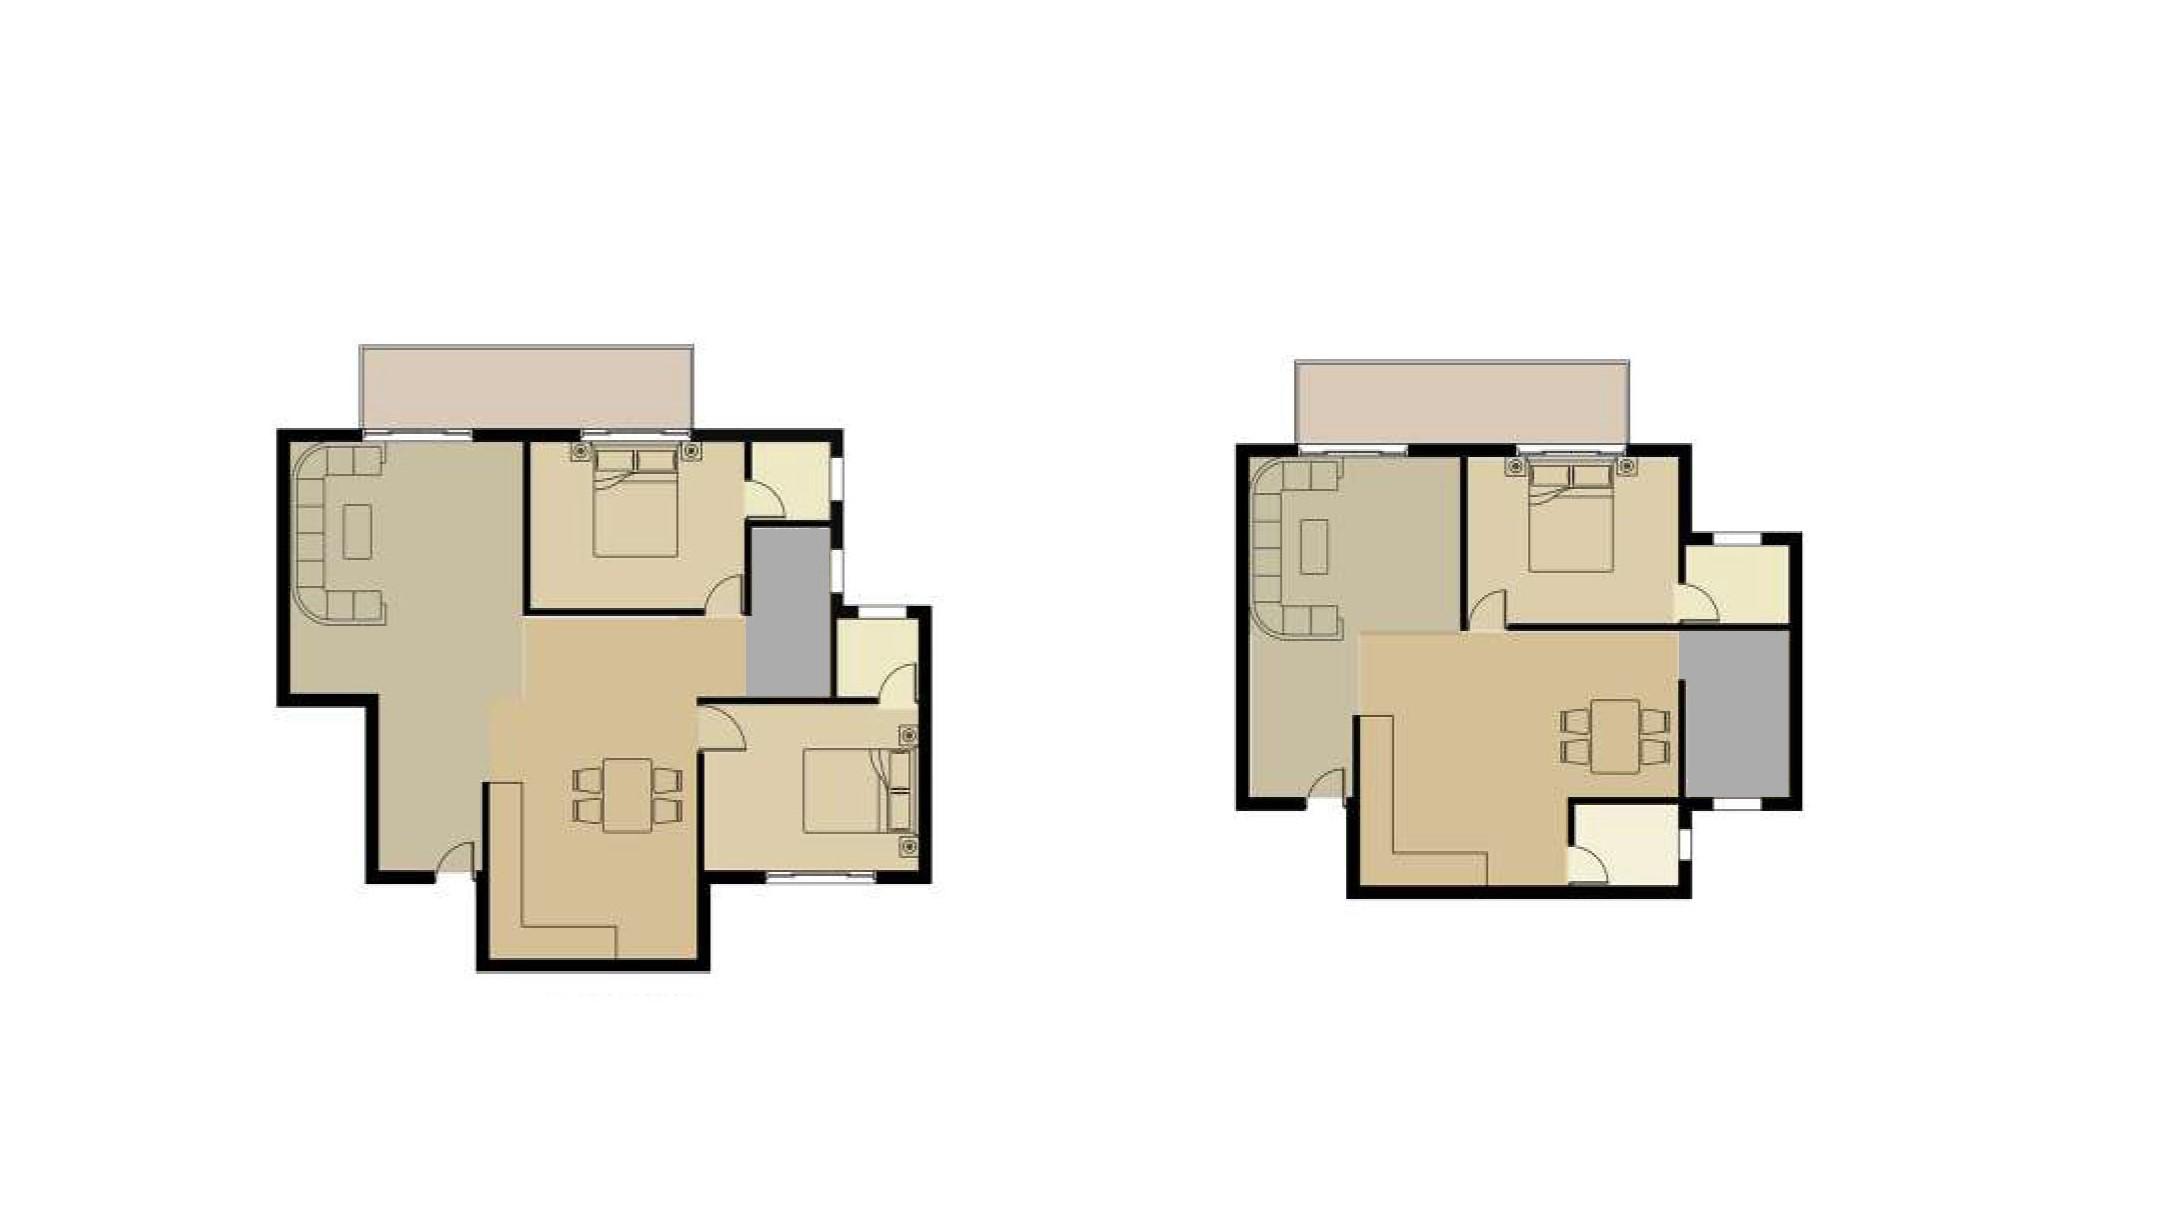 Plans Of Apartment Units With Half Bedrooms